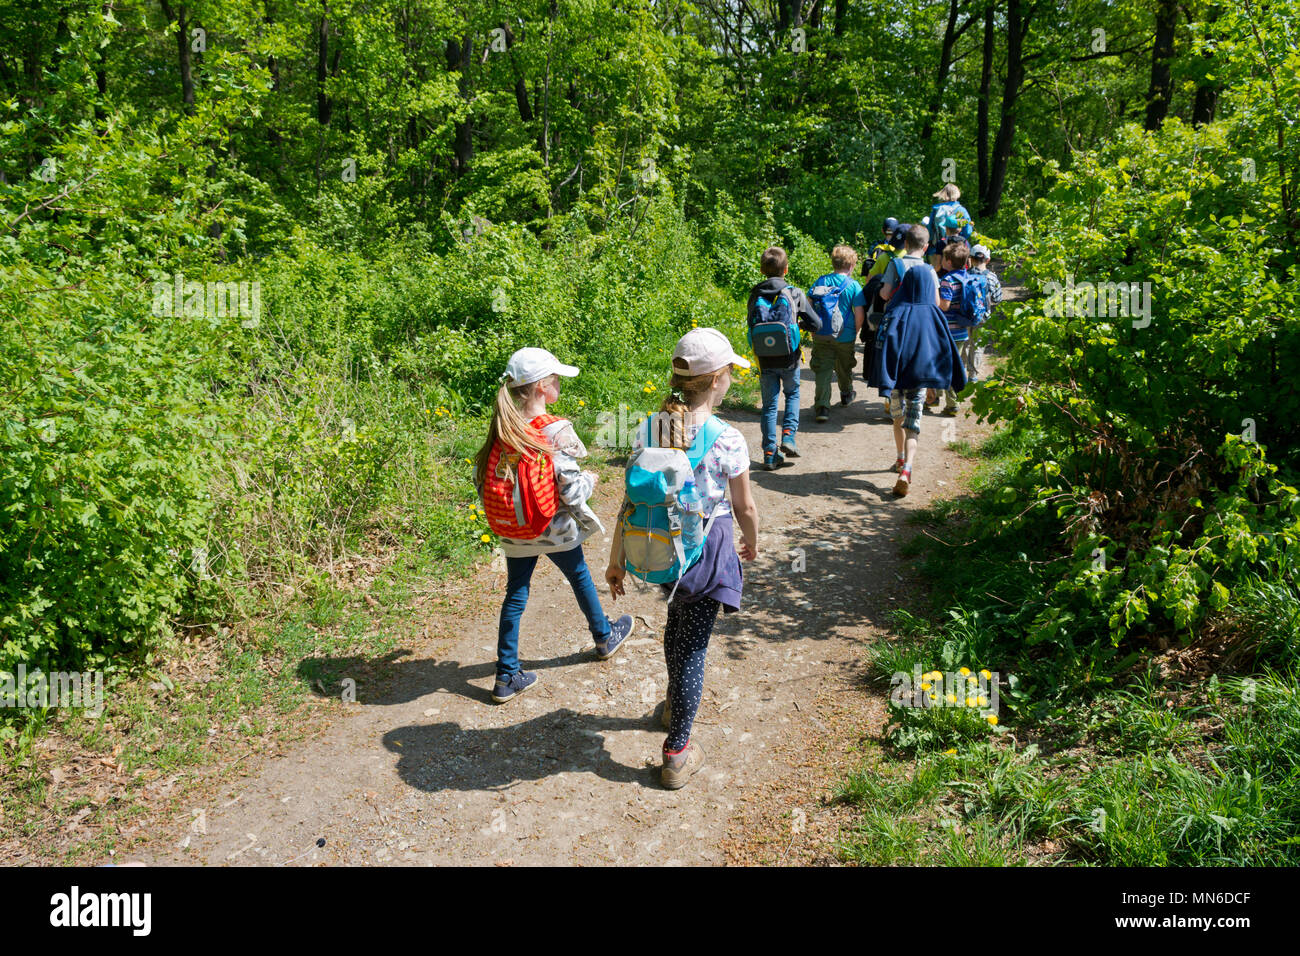 Vienna, Austria - April, 2018: School class on a field trip in the forest of Vienna Woods. Children enjoy the outdoors on a sunny spring day. Stock Photo